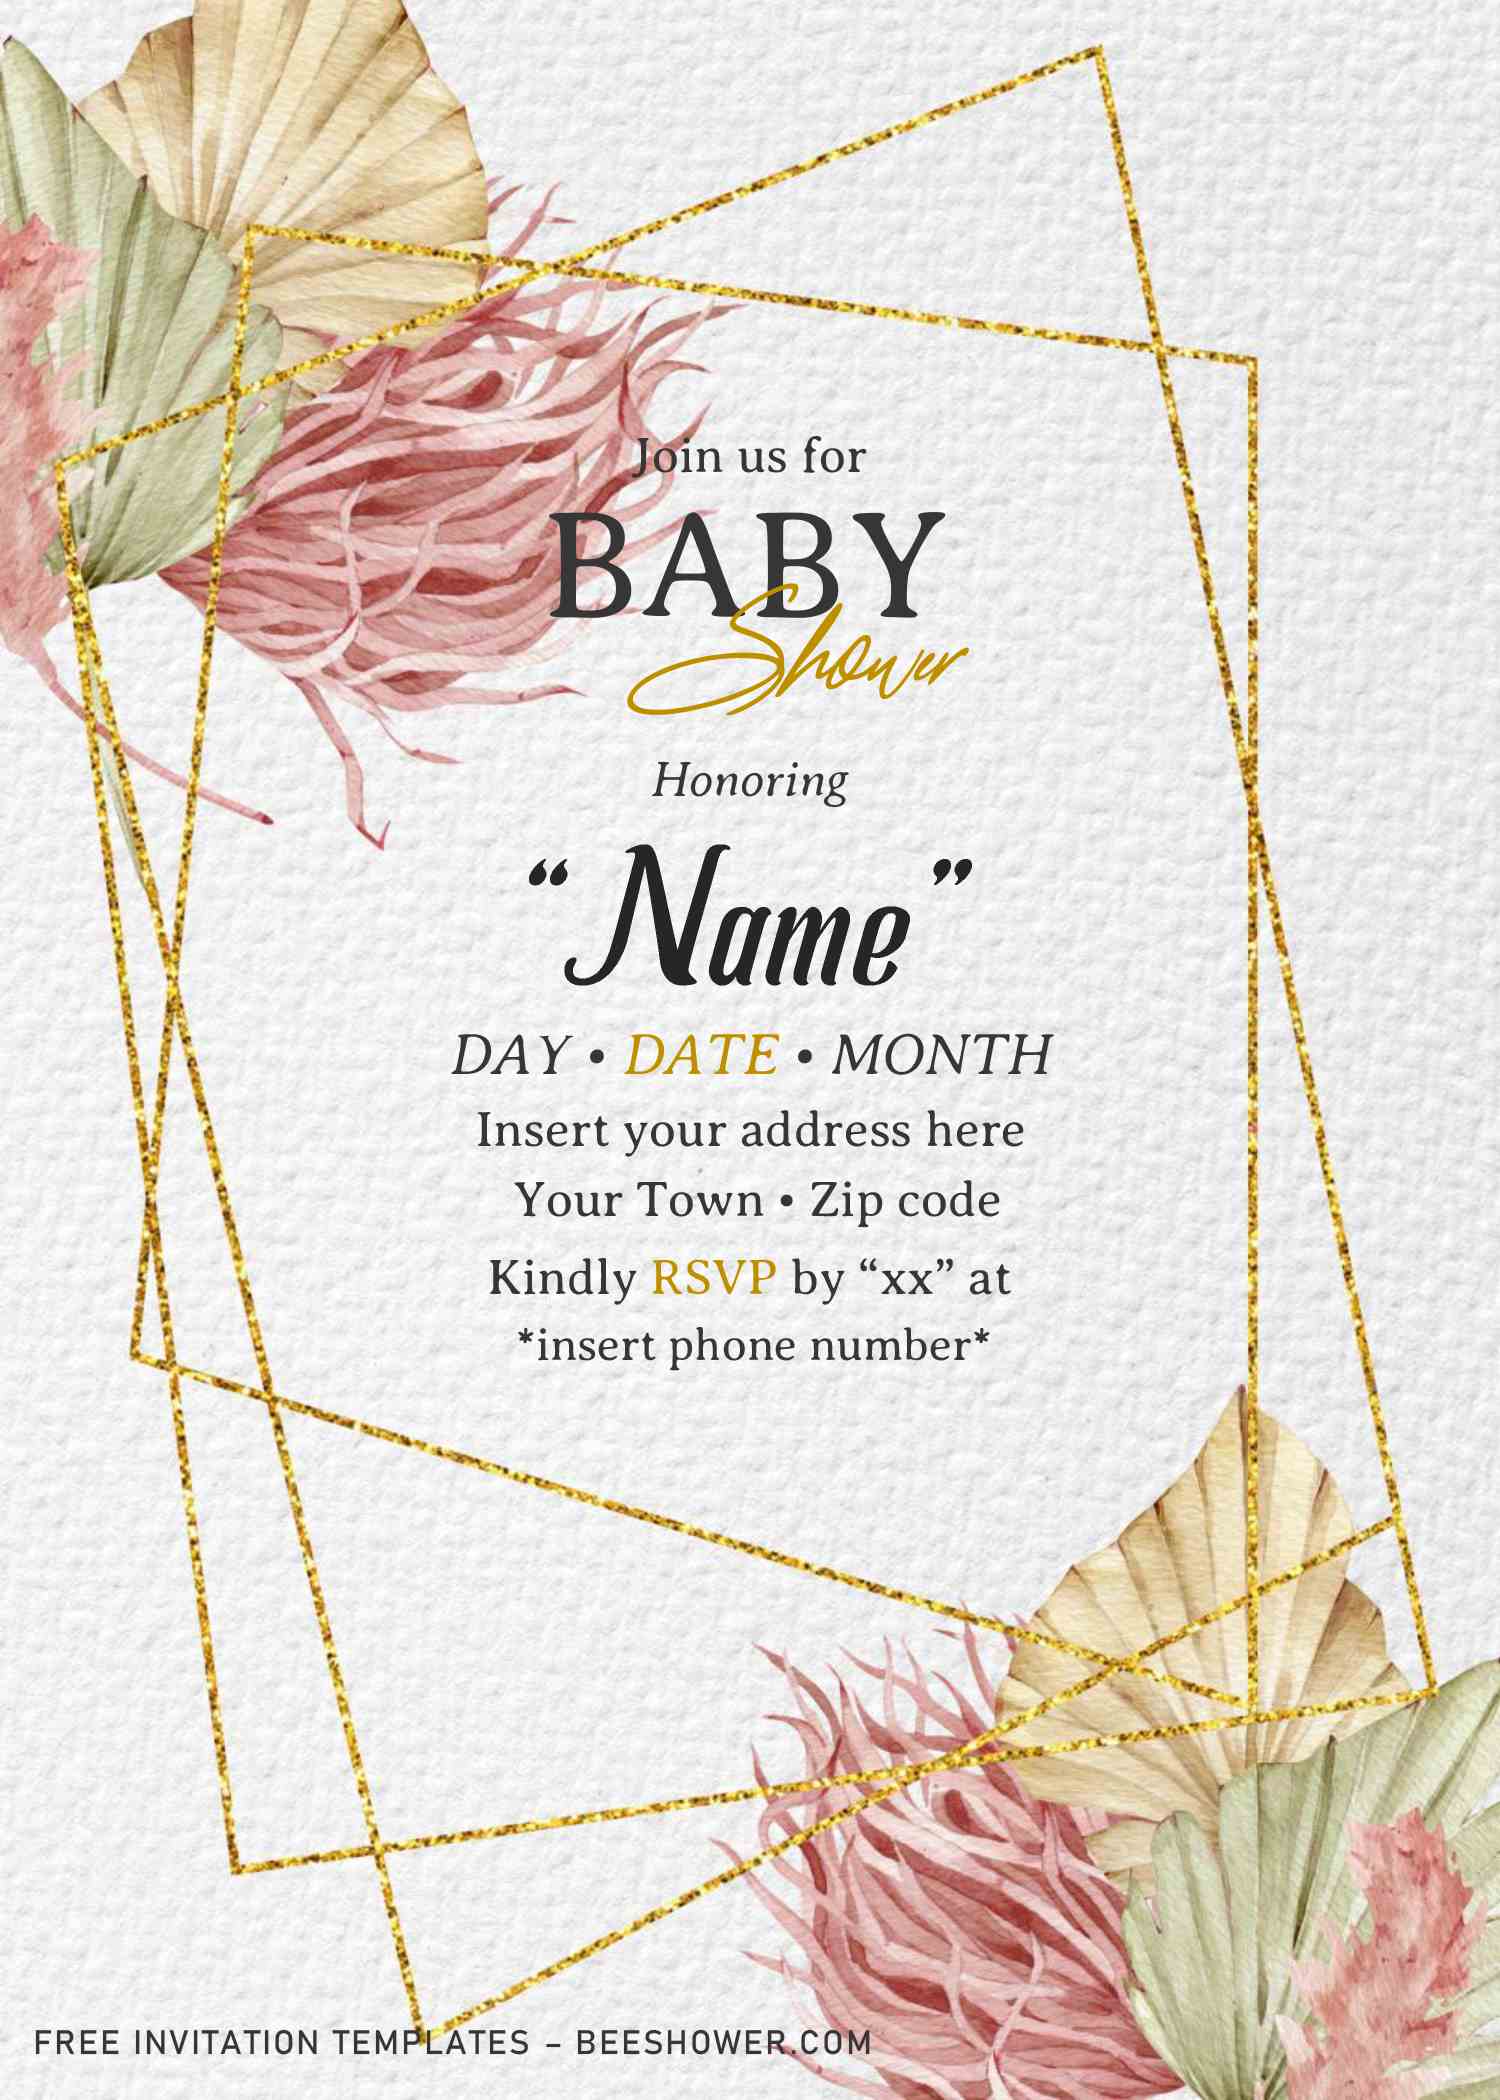 Free Bohemian Baby Shower Invitation Templates For Word FREE